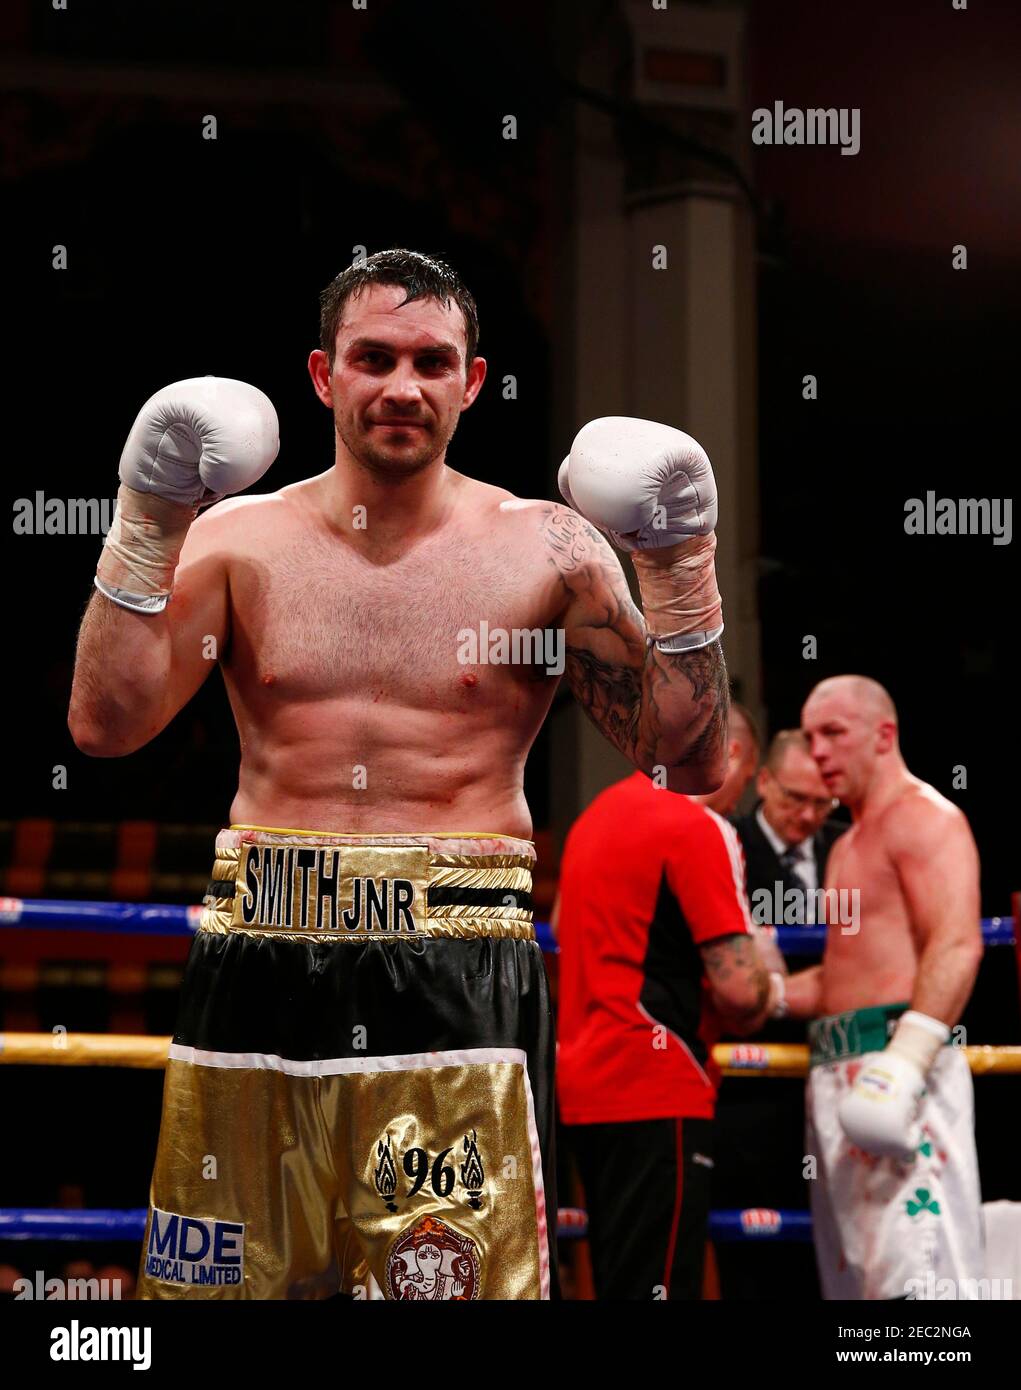 Boxing - Paul Smith v Tommy Tolan - Liverpool Olympia - 9/11/12 Paul Smith  celebrates winning the fight Mandatory Credit: Action Images / Jason  Cairnduff Livepic Stock Photo - Alamy